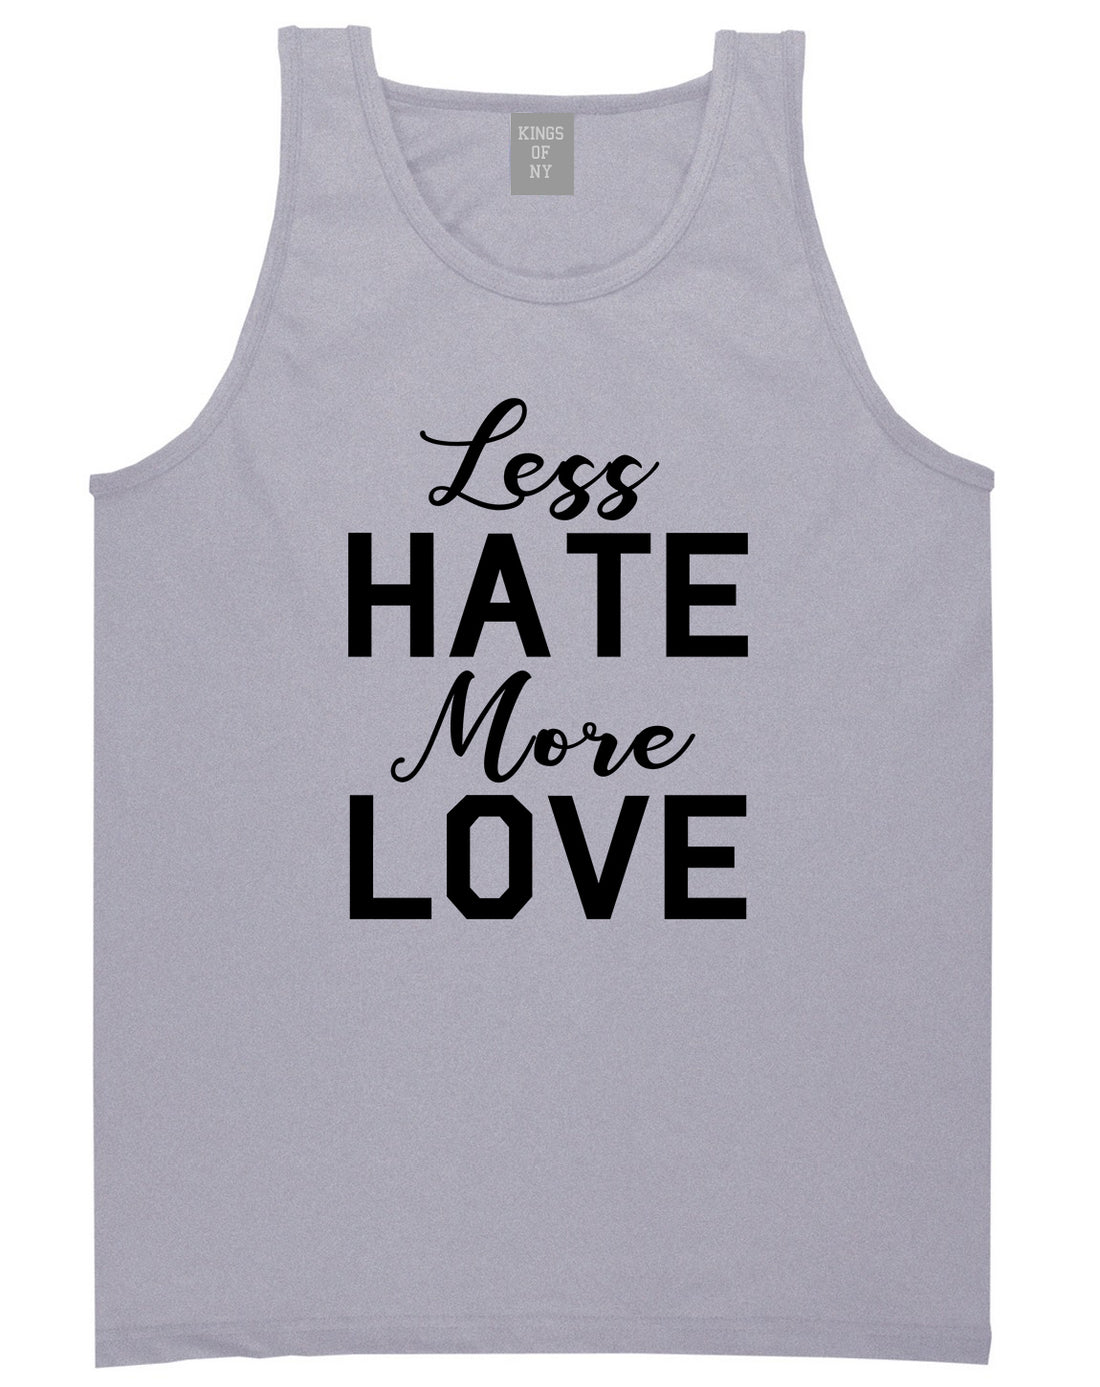 Less Hate More Love Mens Tank Top Shirt Grey by Kings Of NY